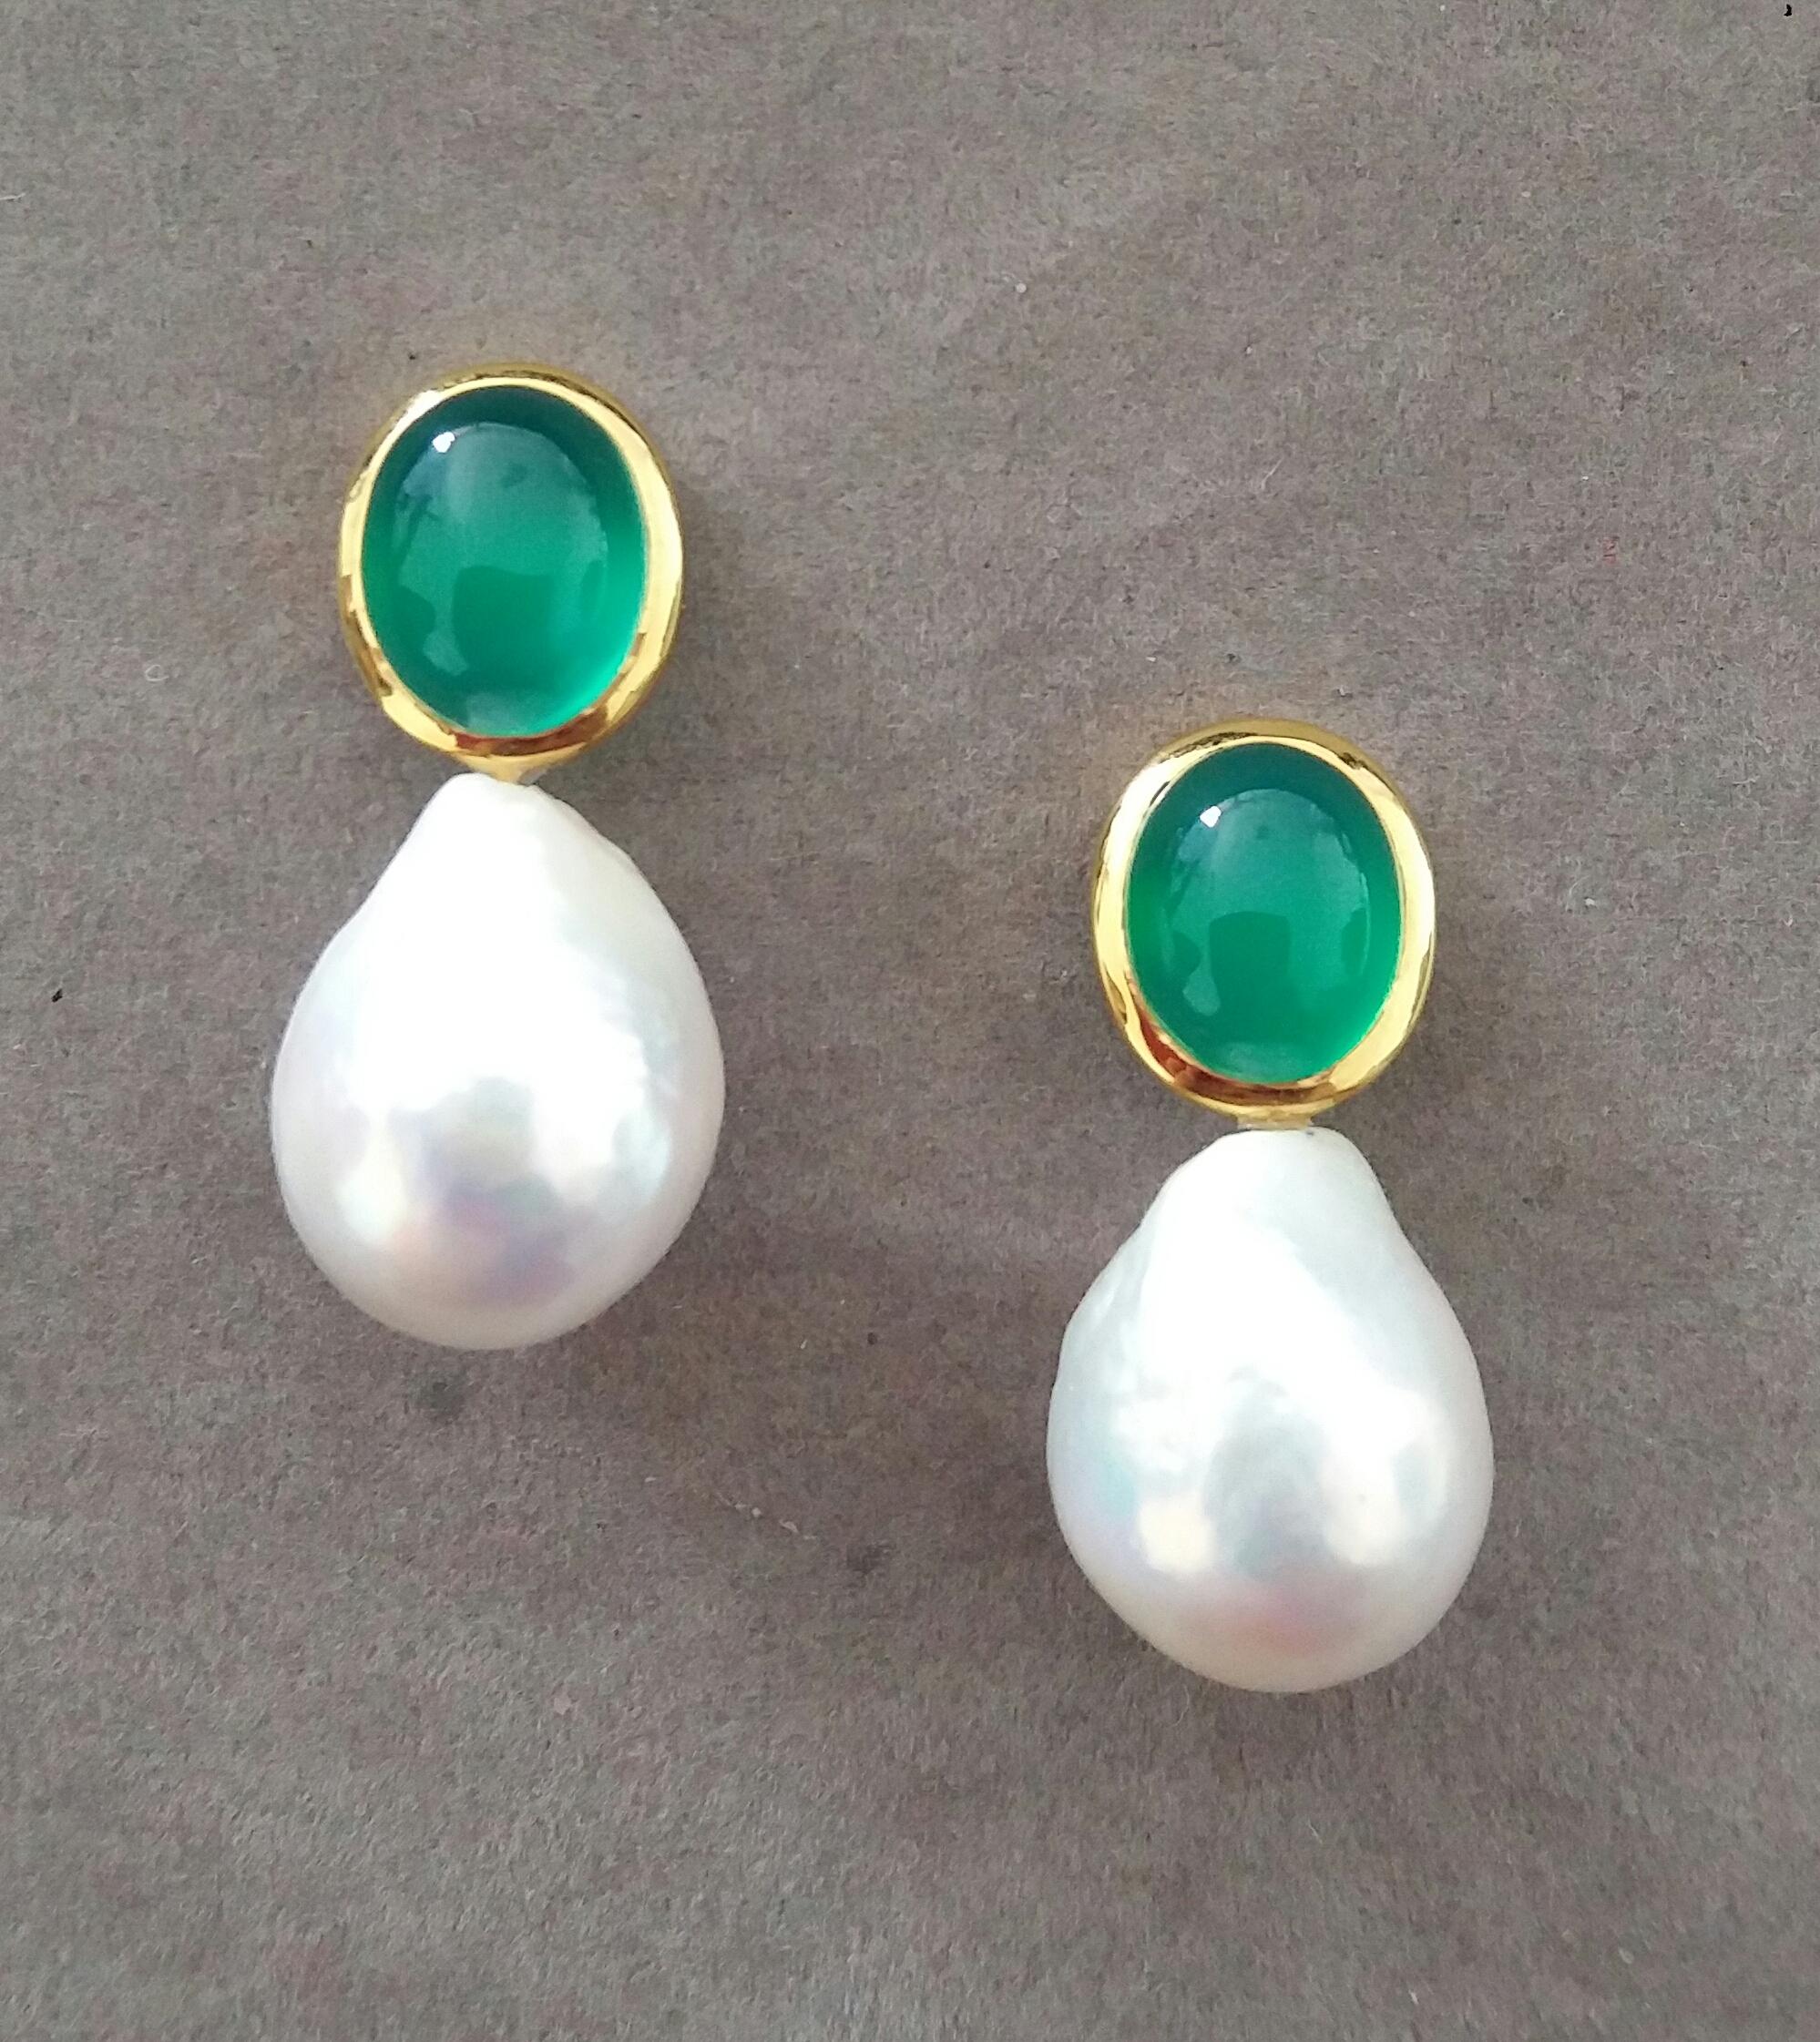 These simple chic and handmade stud earrings have a pair of Oval Shape Natural Green Onyx Cabs measuring 9 x 11 mm set in solid 14 Kt. yellow gold bezel on the top and in the lower parts 2 excellent luster White Pear Shape Baroque Pearls measuring